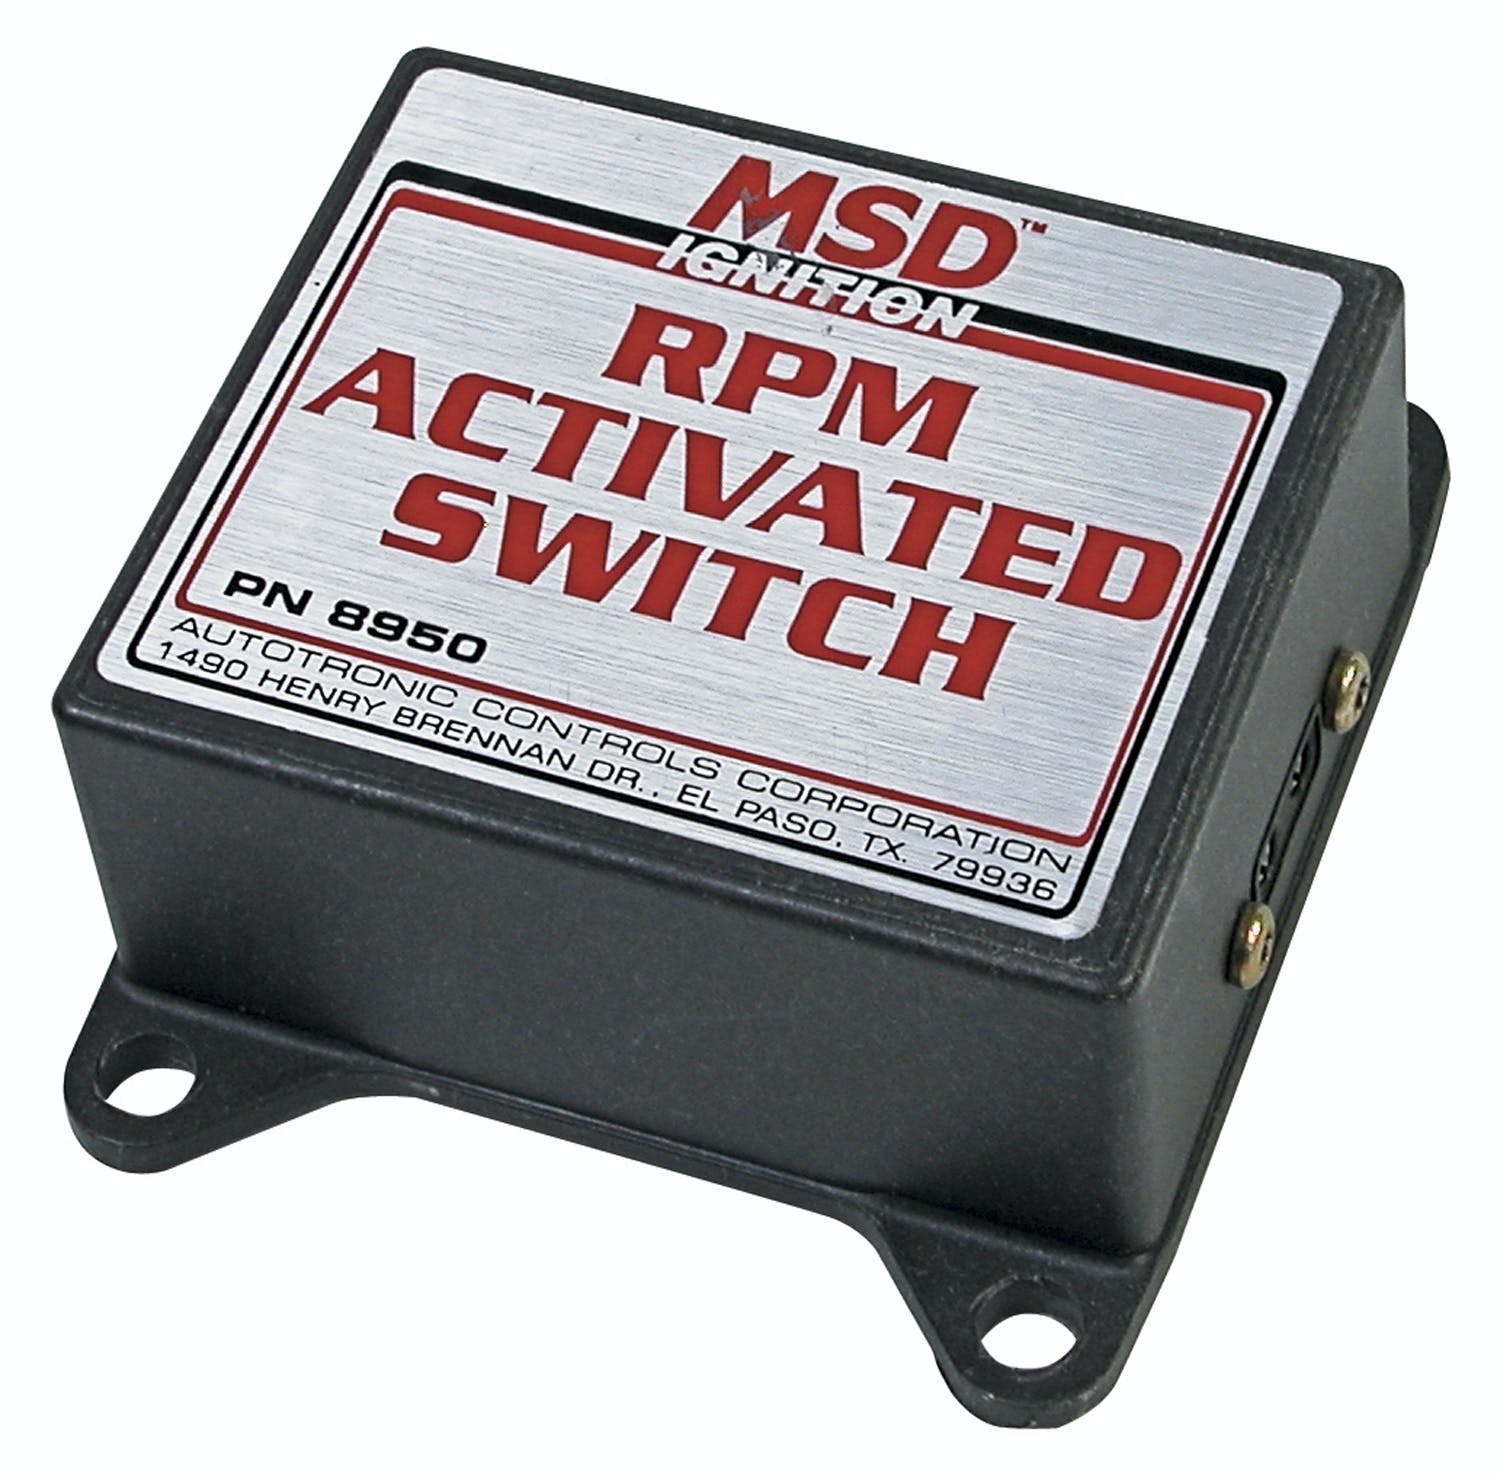 MSD Performance 8950 Switch Kit, RPM Activated